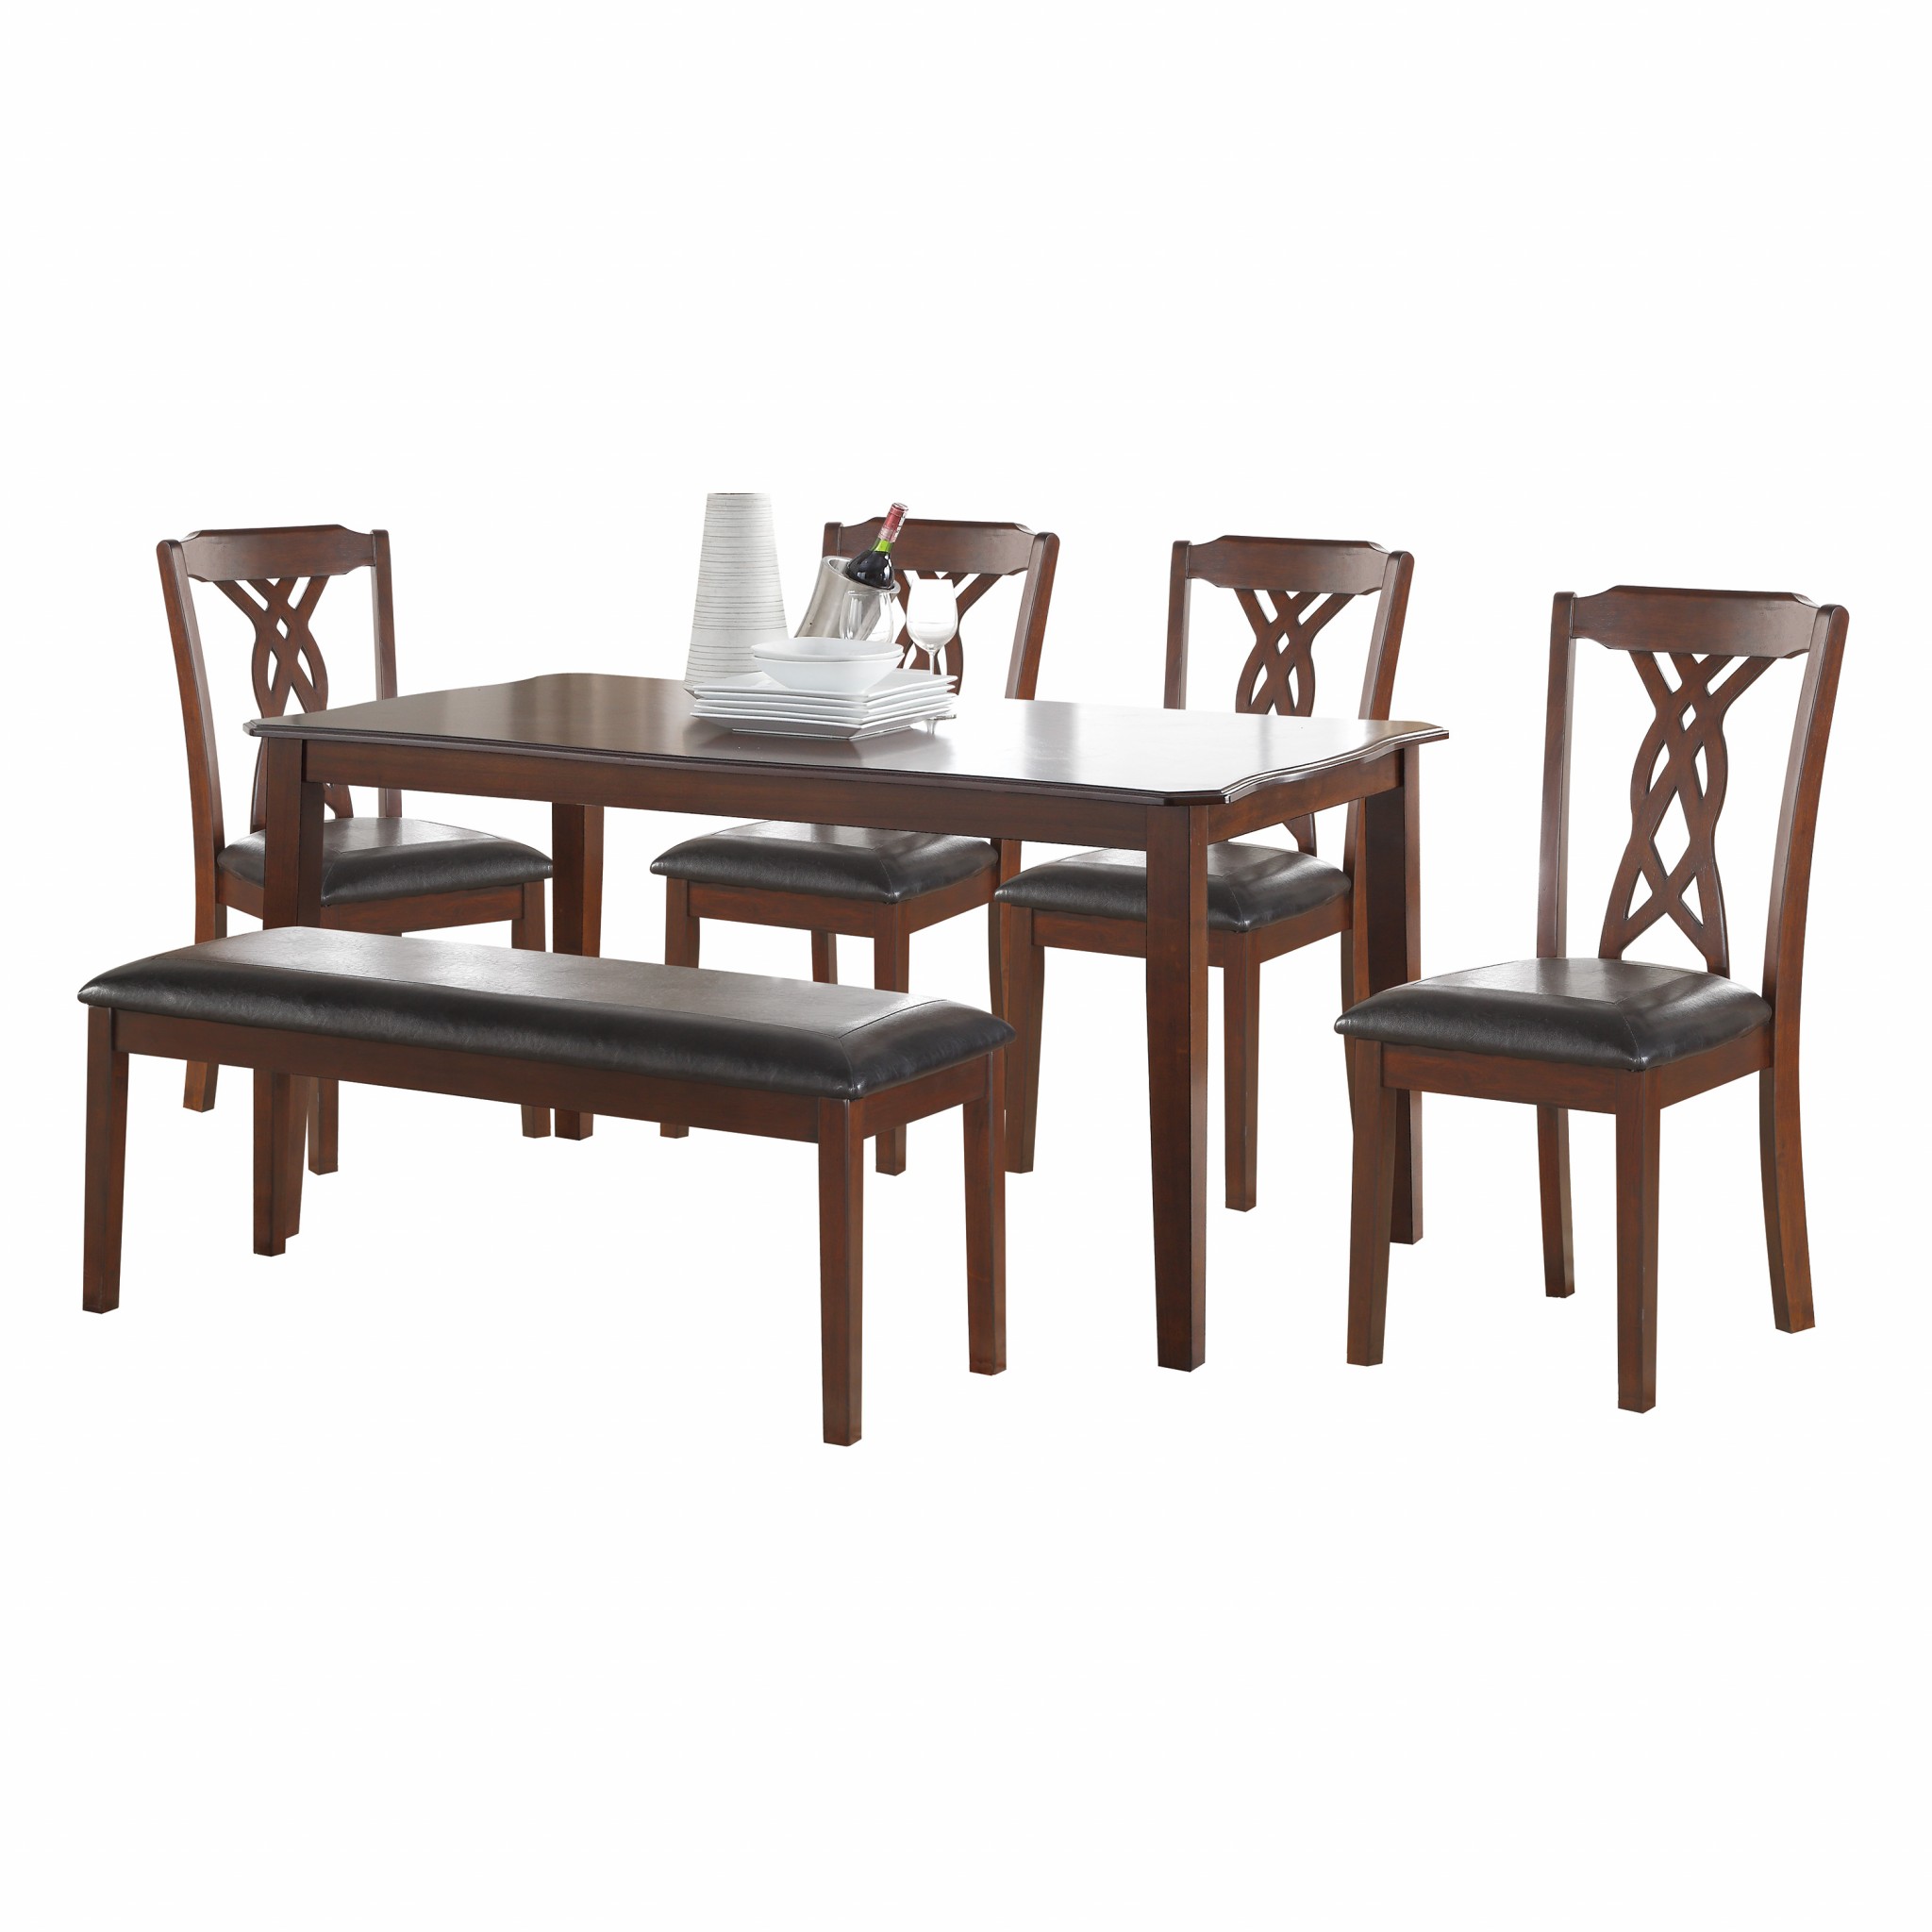 60" X 36" X 30" 6Pc Black Leatherette And Espresso Dining Set